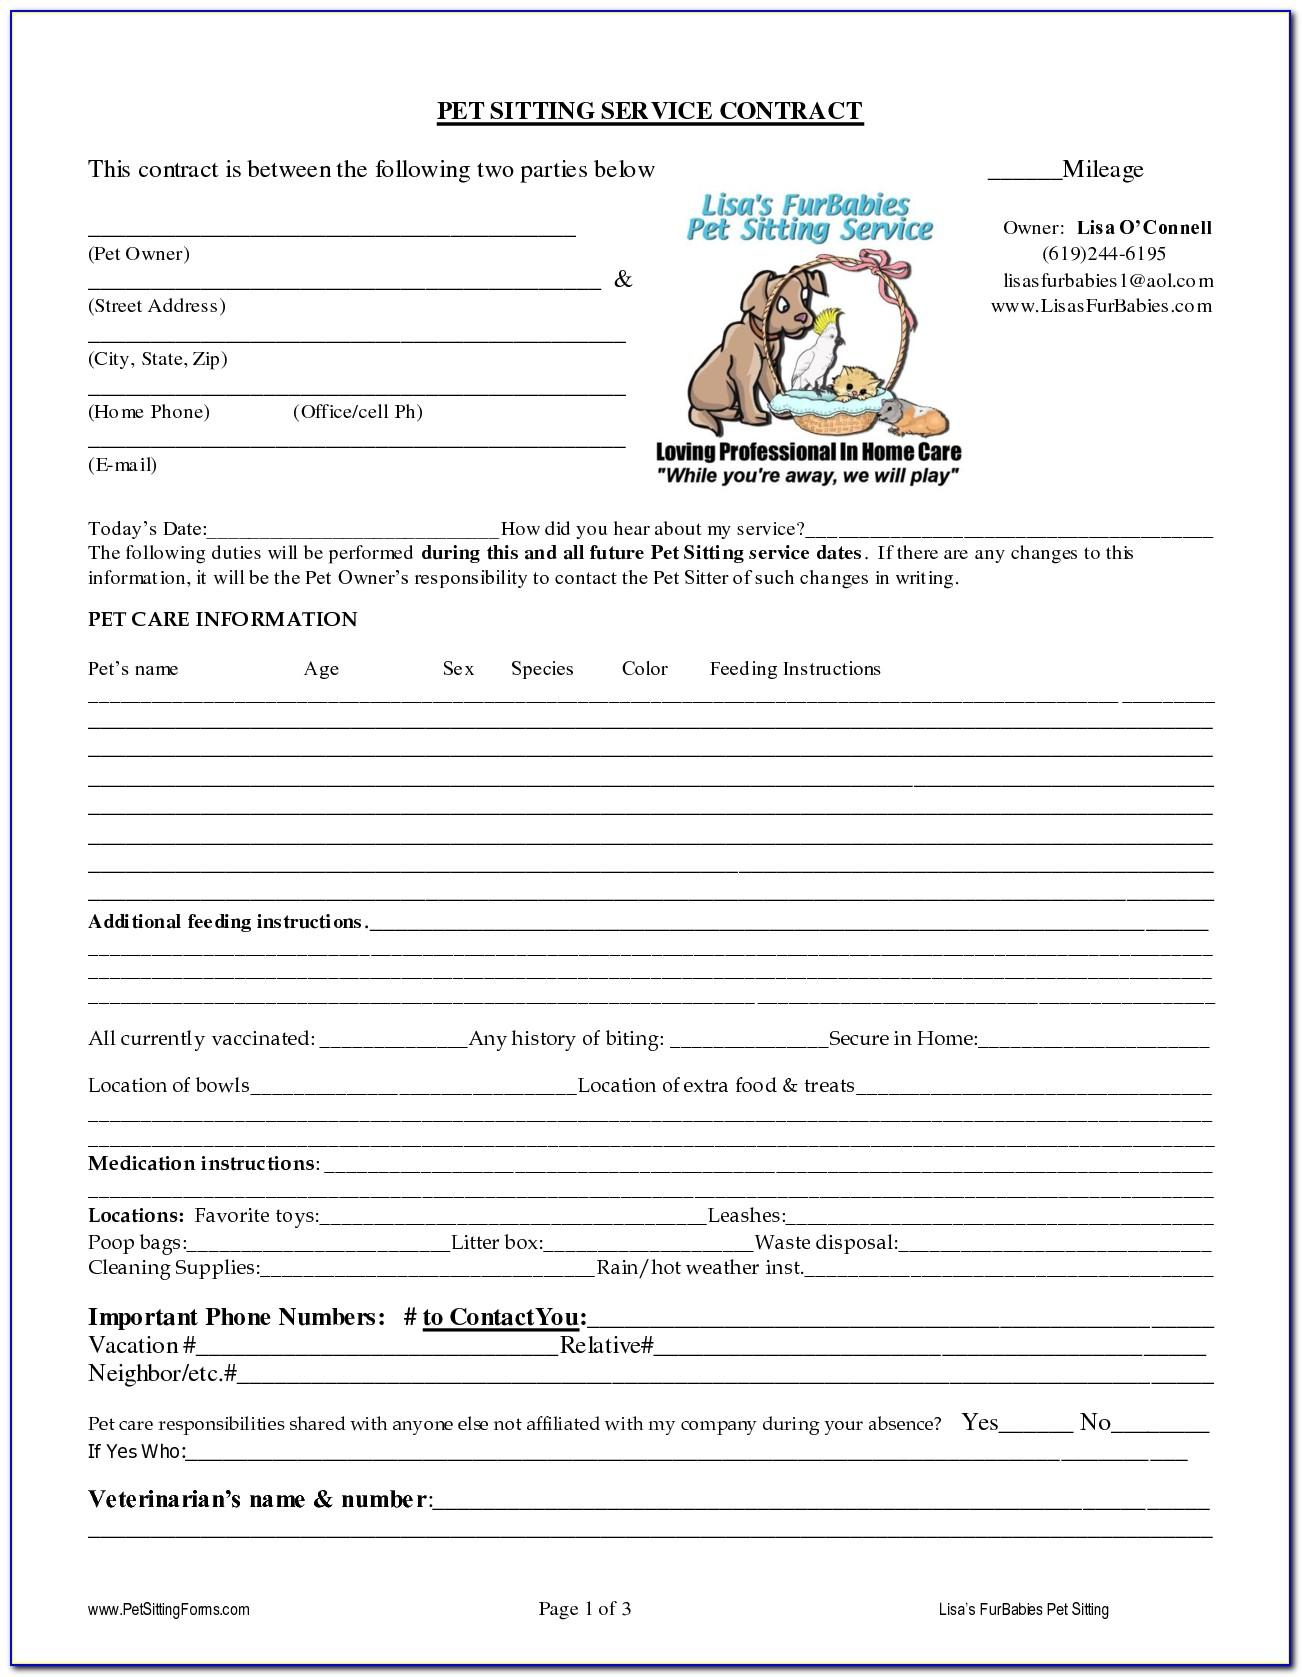 Dog Grooming Contract Template